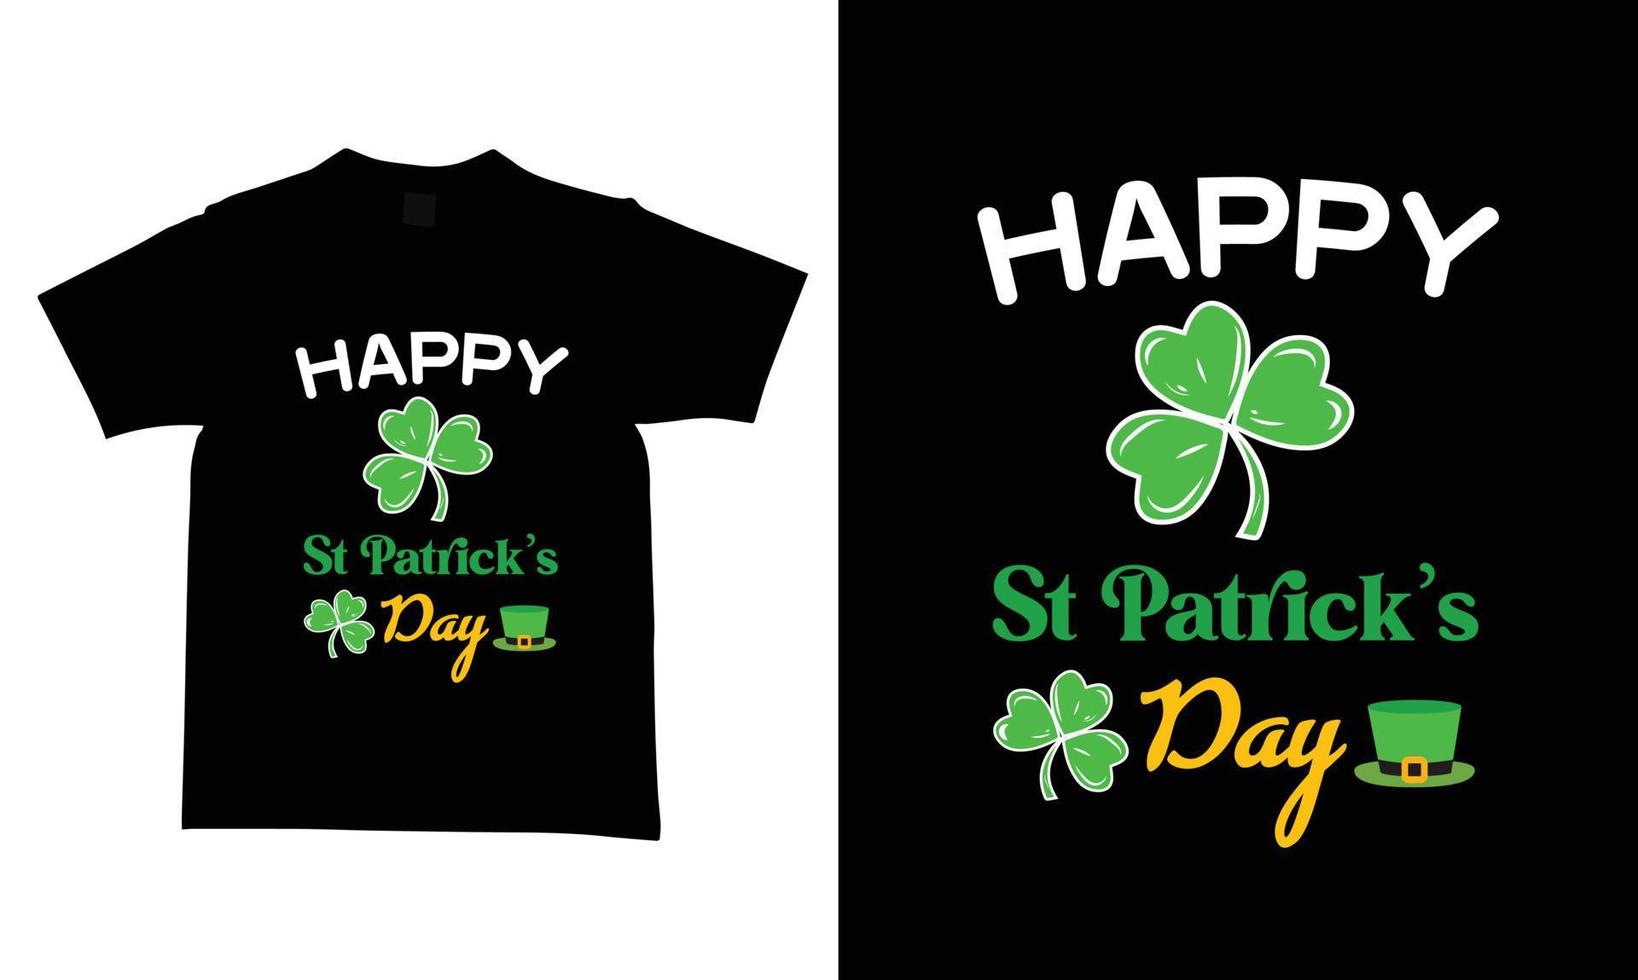 St Patrick's day t-shirt design templates new and modern designs. vector